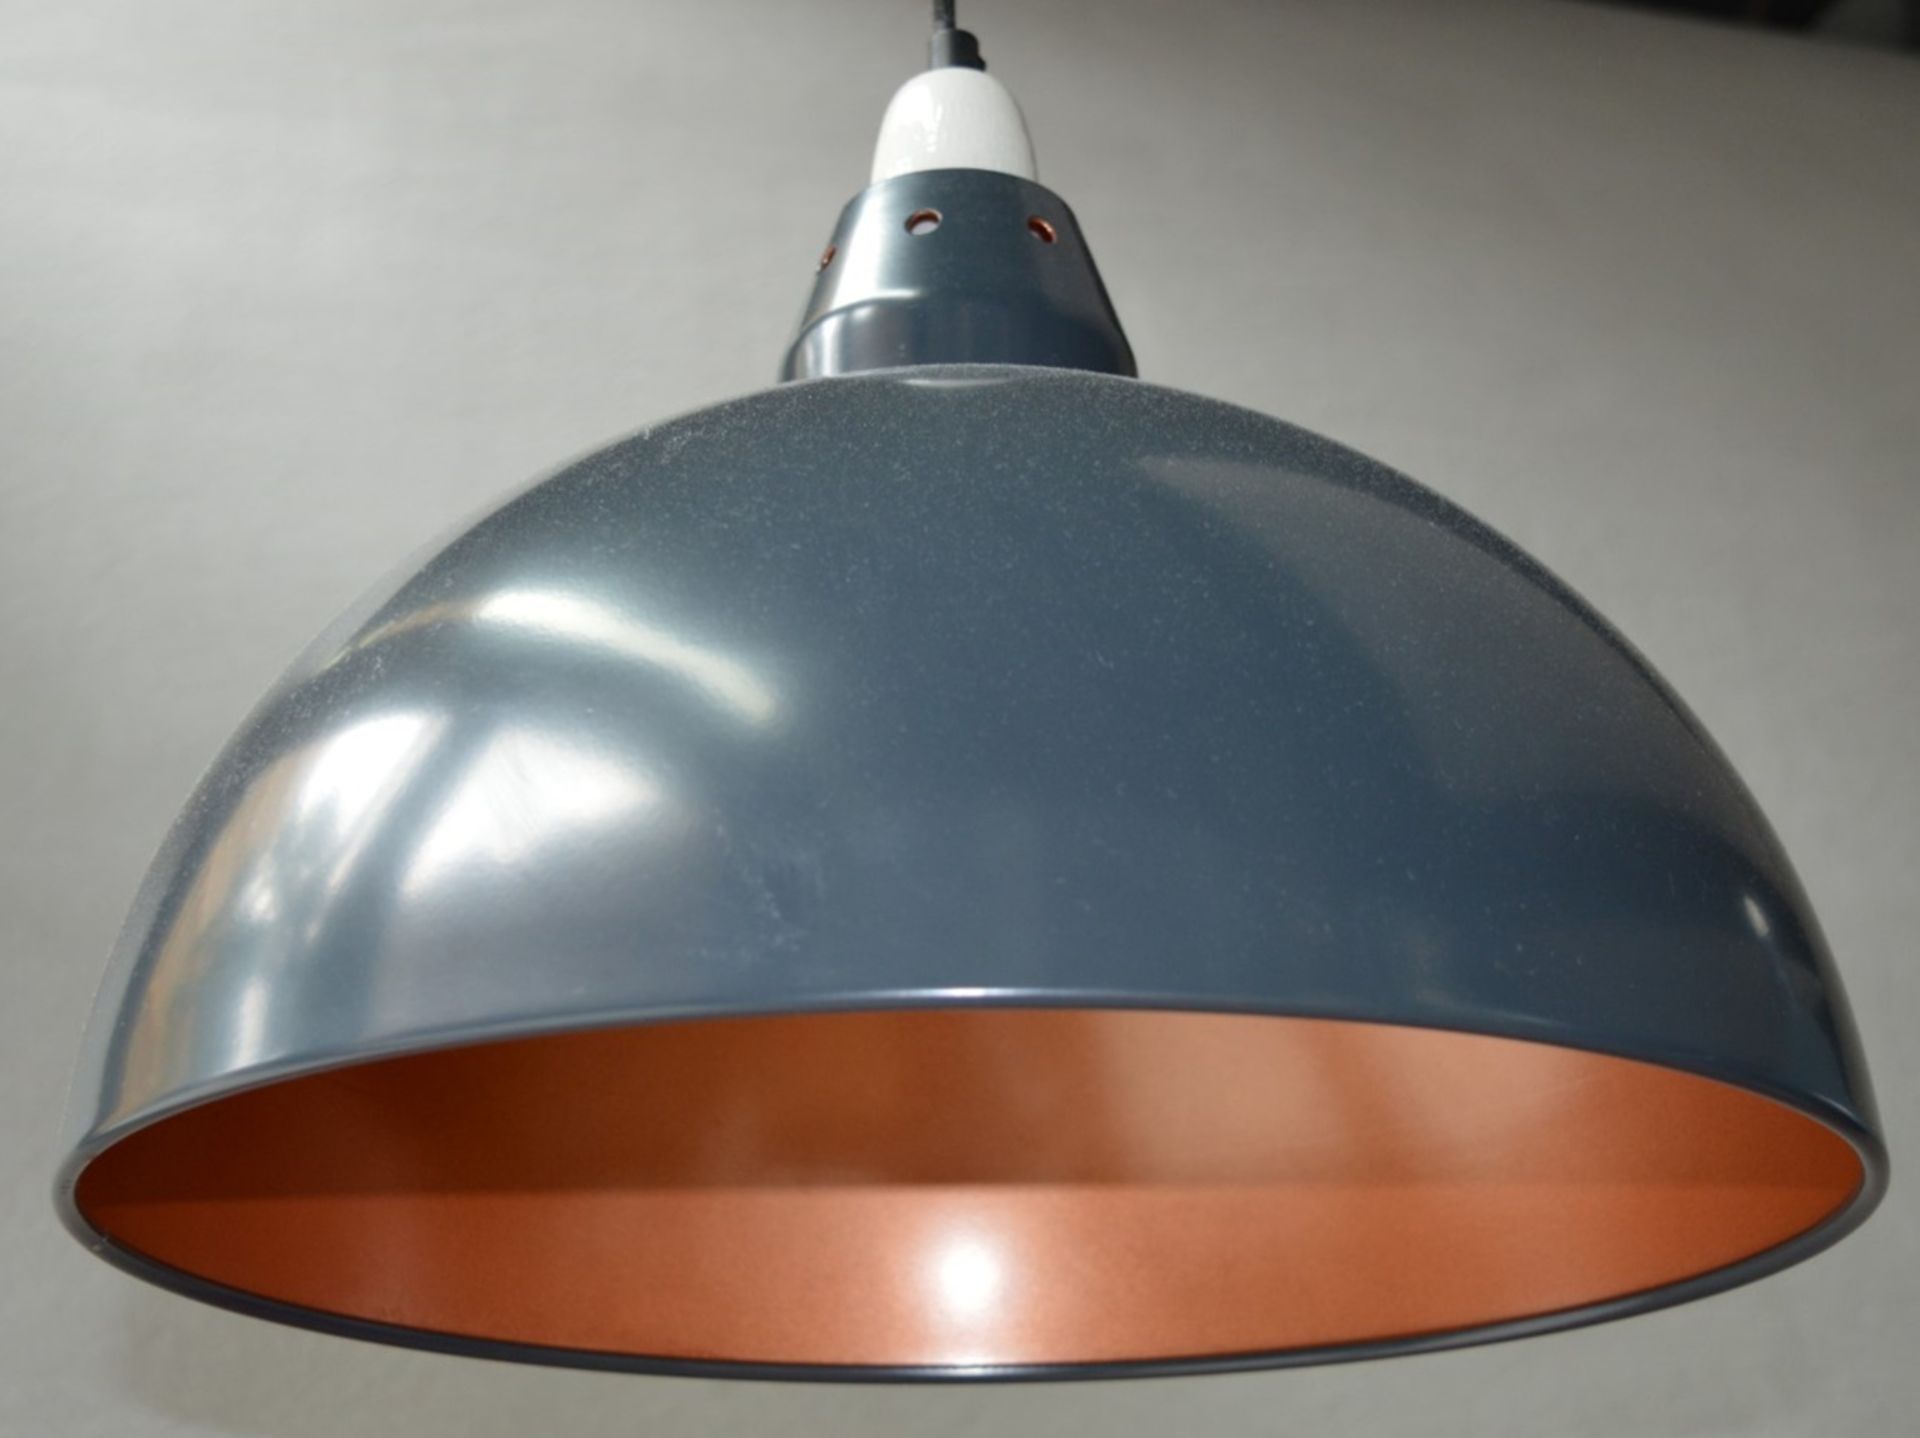 4 x Dome Pendant Ceiling Light Fittings - Grey and Copper - Vintage Style - 40cm Diameter - 250cm - Image 2 of 6